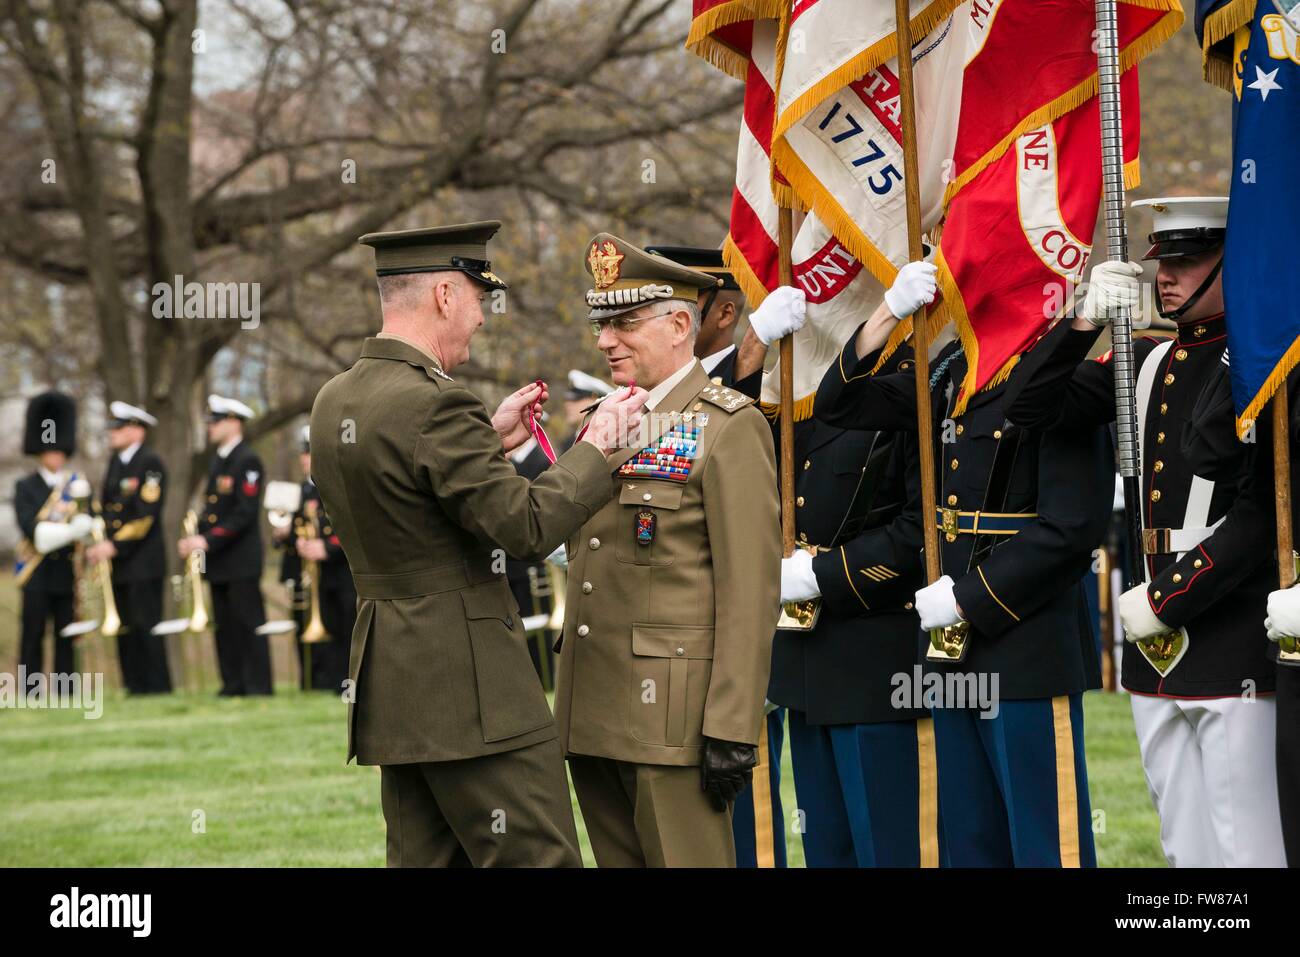 U.S Joint Chiefs Chairman General Joseph F. Dunford Jr. presents the Legion of Merit to Chief of Defense for Italian Armed Forces General Claudio Graziano during a full honors ceremony at Whipple Field on Joint Base Myer-Henderson Hall March 31, 2016 in Arlington, Virginia. Stock Photo